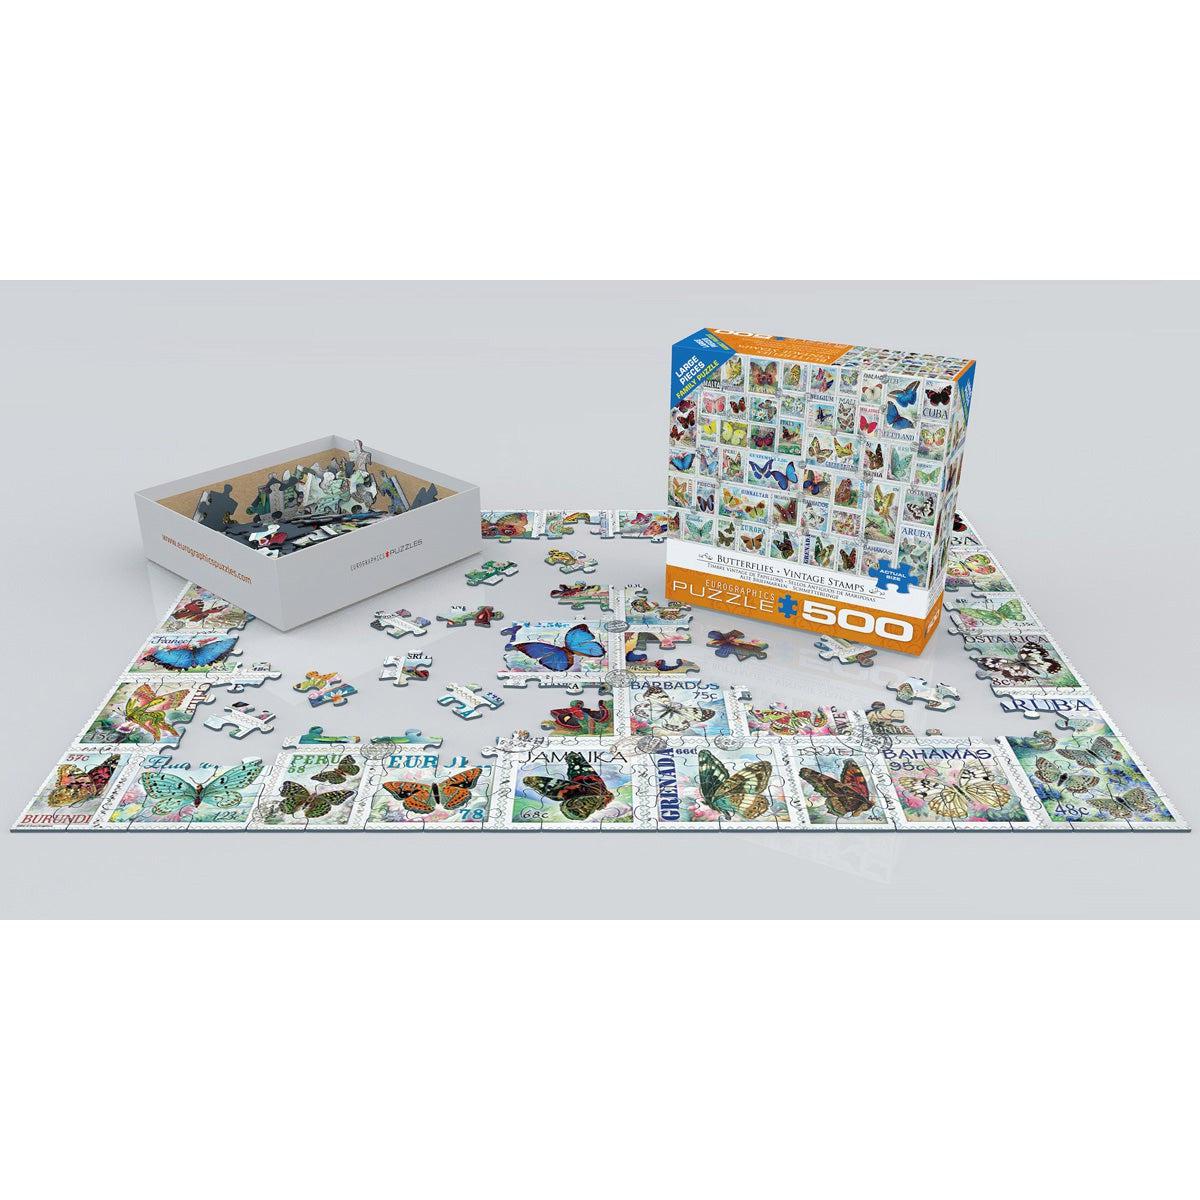 Butterflies Vintage Stamps 500 Piece Jigsaw Puzzle Eurographics